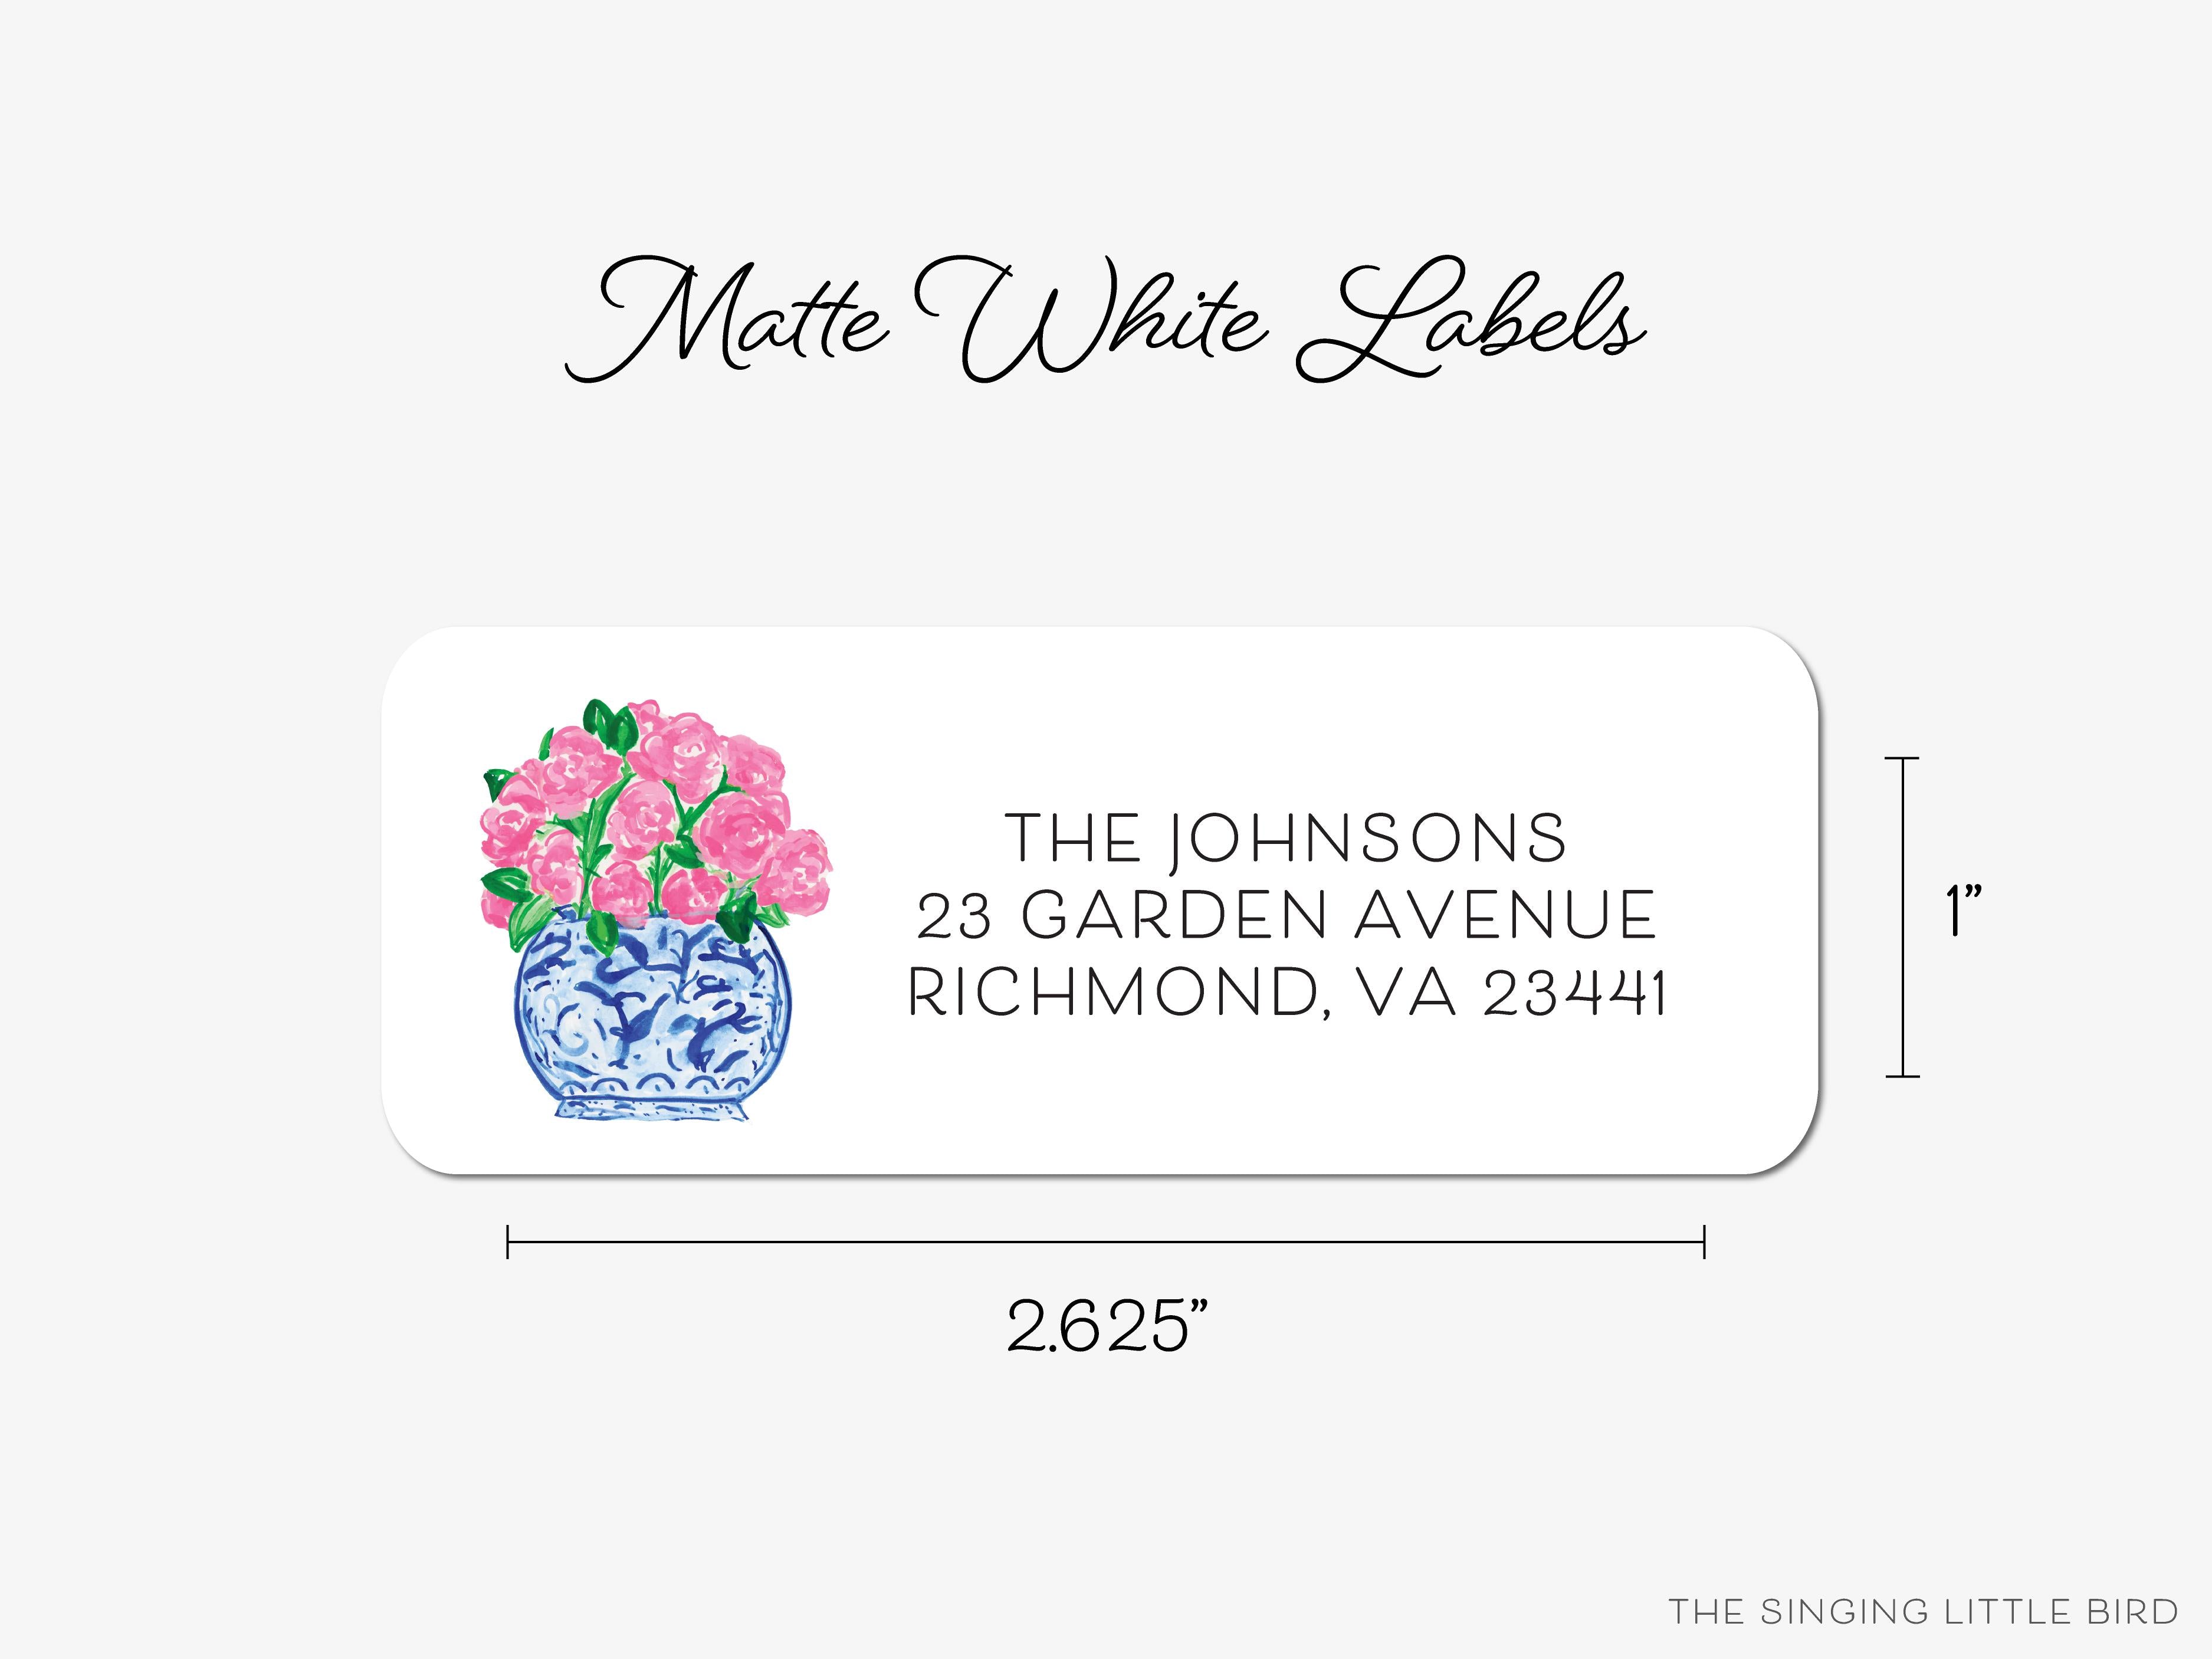 Peony Ginger Jar Return Address Labels-These personalized return address labels are 2.625" x 1" and feature our hand-painted watercolor Peony Ginger Jar, printed in the USA on beautiful matte finish labels. These make great gifts for yourself or the floral lover.-The Singing Little Bird